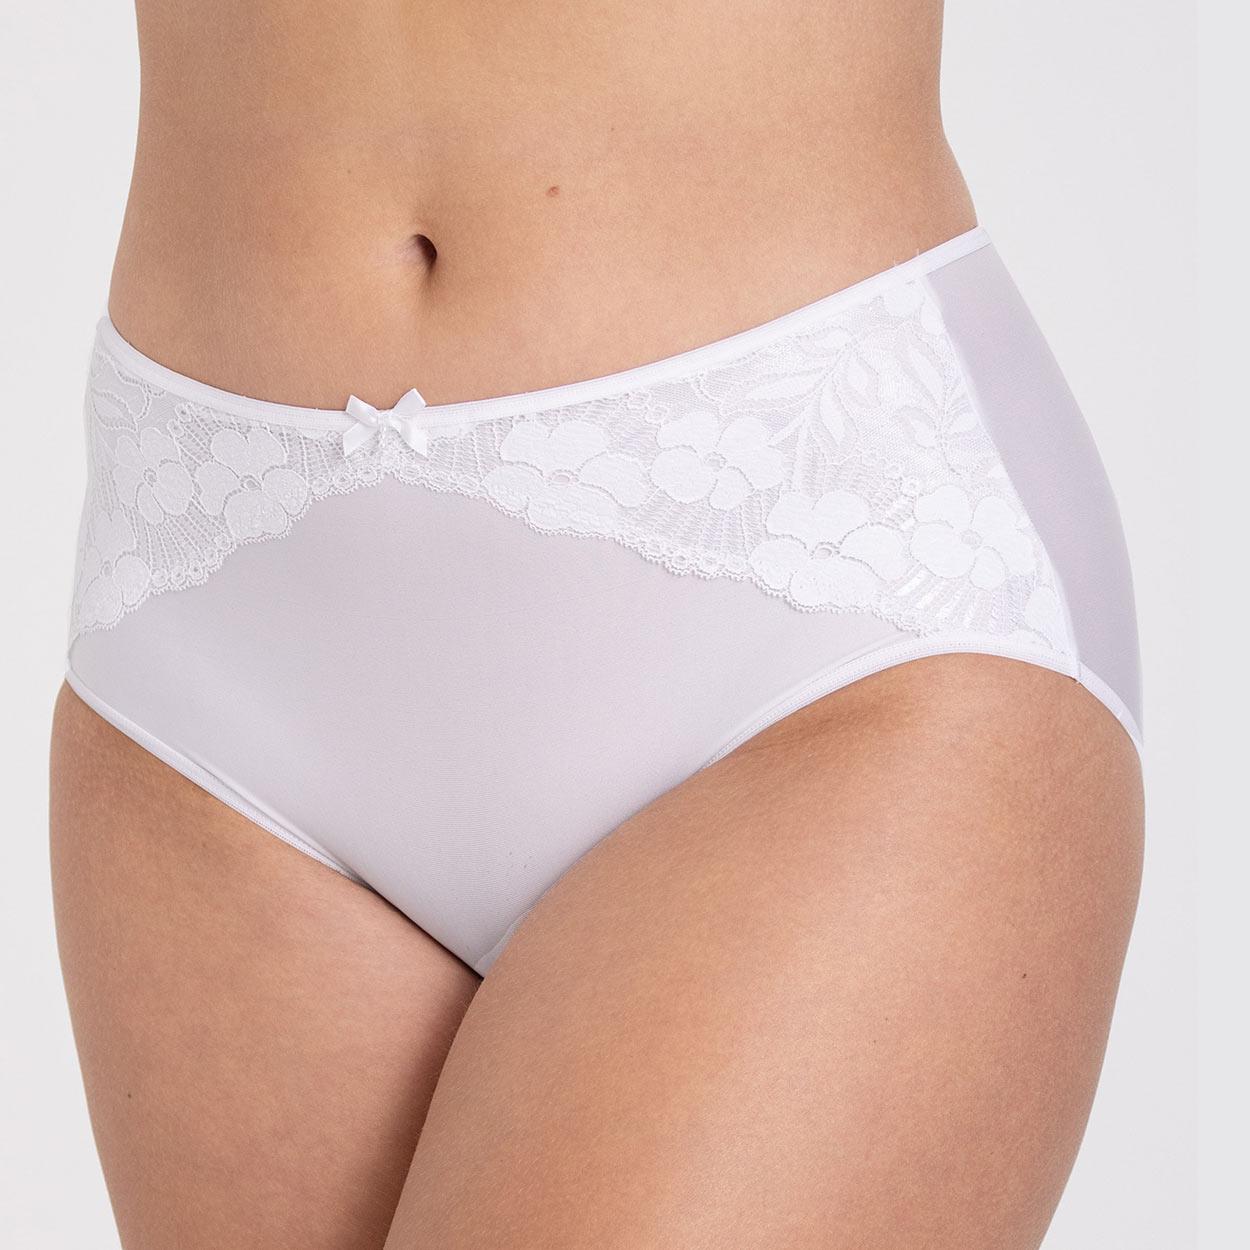 Miss Mary Maxislip Modell Jacquard & Lace in Farbe Weiss